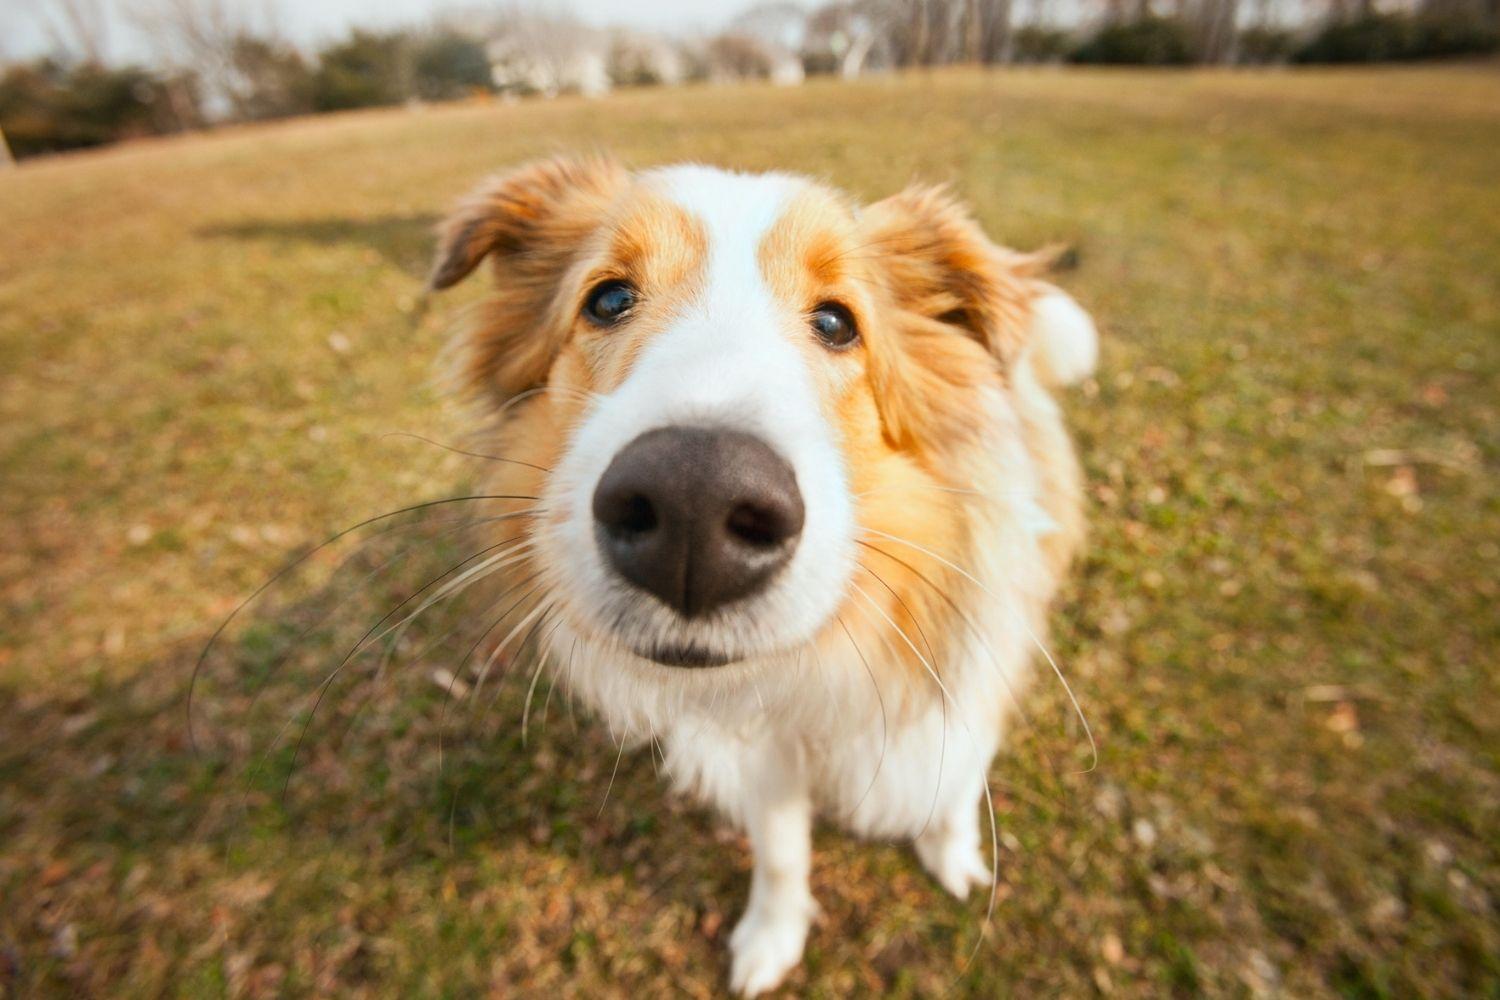 Enjoy some outdoor time with your dog at any one of these 16 awesome dog parks or off-leash areas in Baltimore. Check out our list and get ready to run wild!